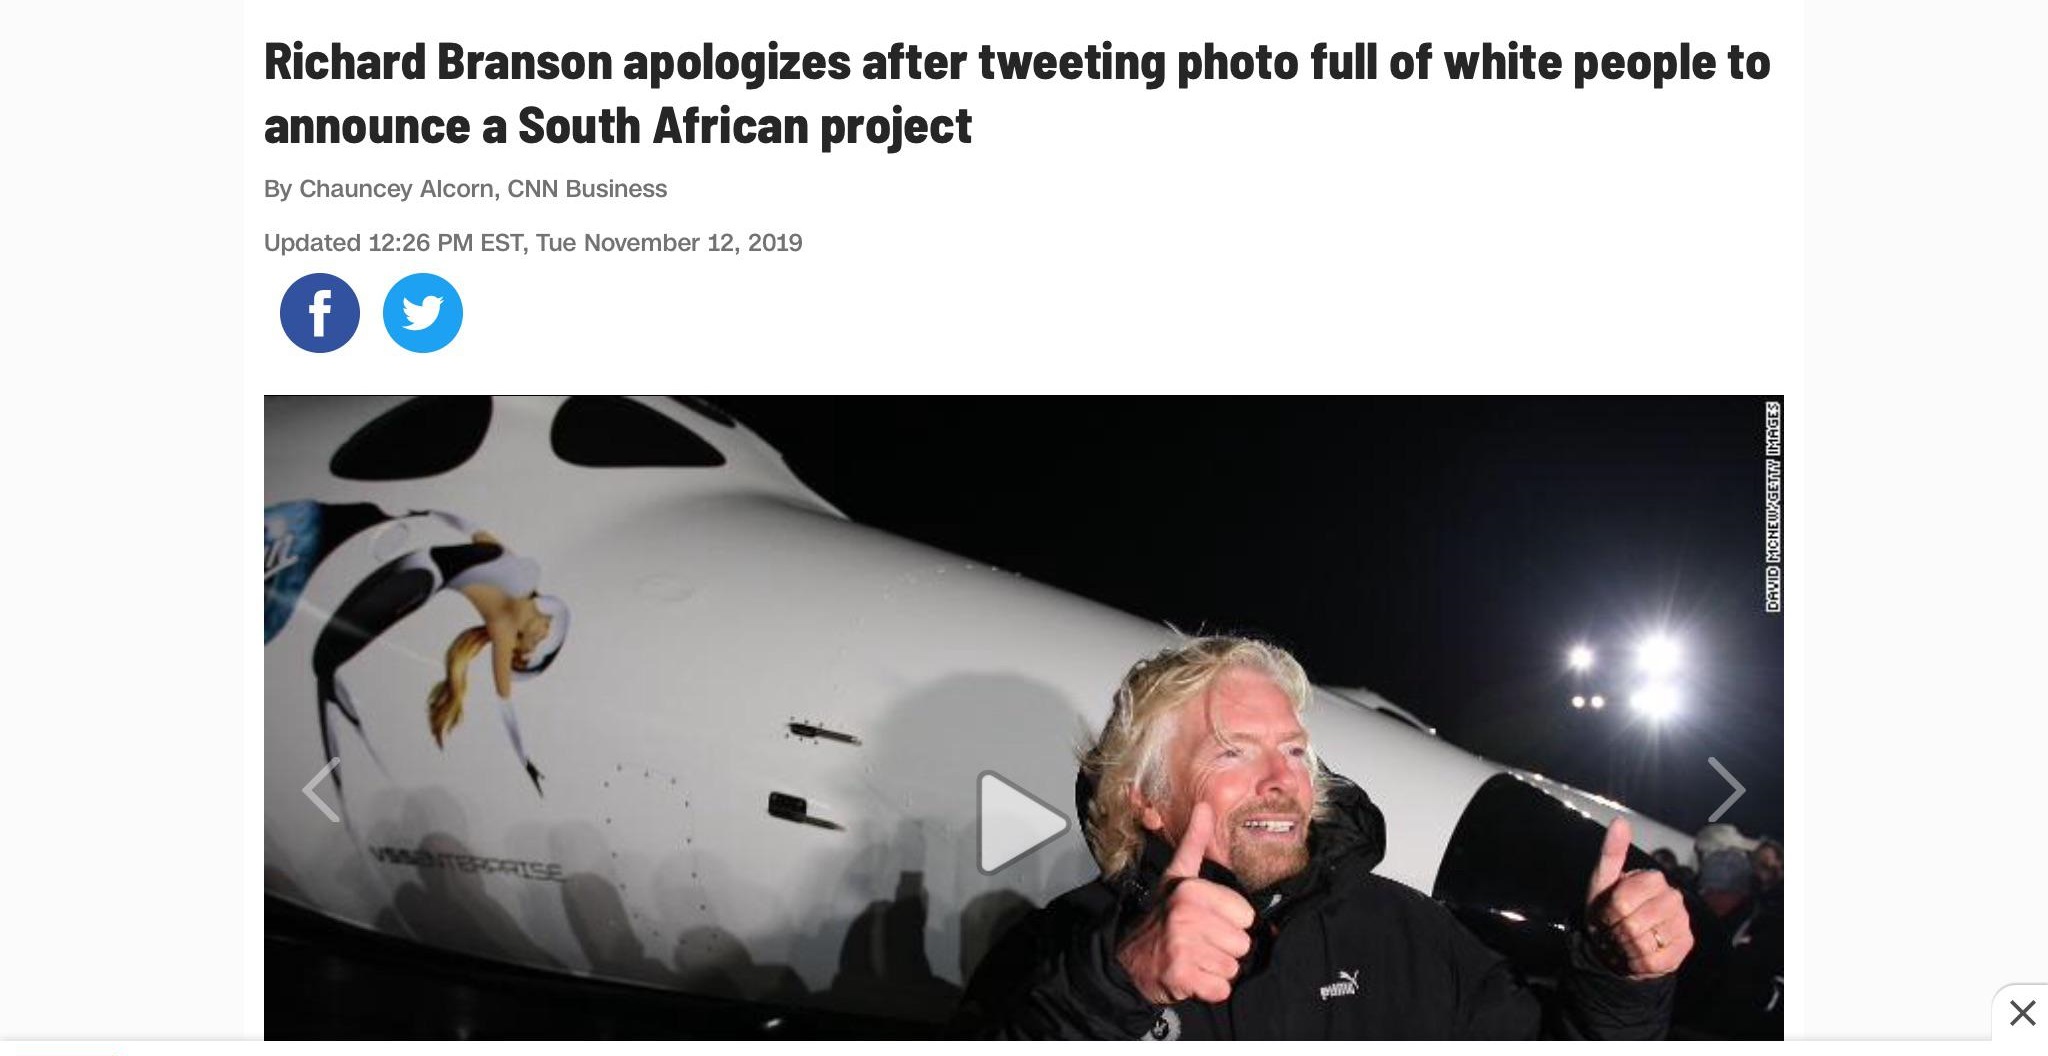 virgin galactic spaceship - Richard Branson apologizes after tweeting photo full of white people to announce a South African project By Chauncey Alcorn, Cnn Business Updated Est, Tue David McnewGetty Images